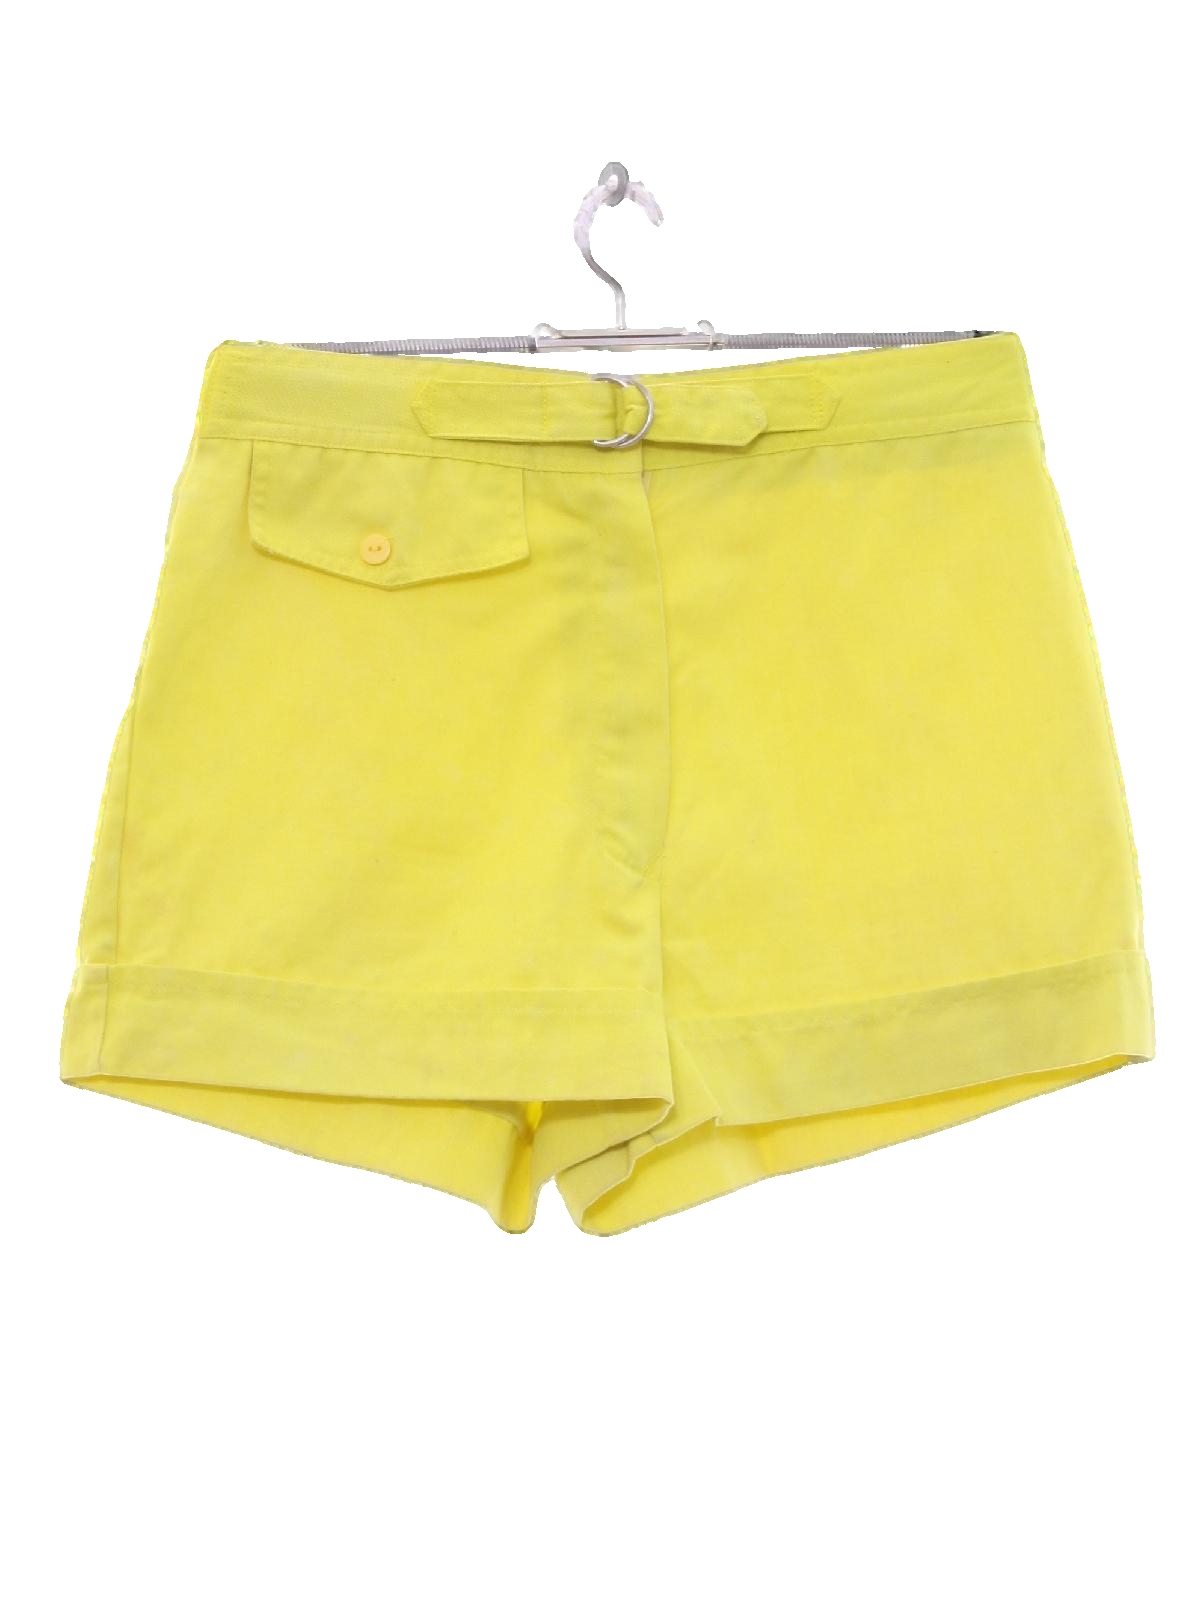 Retro 60s Shorts (Care Label) : 60s style (made in 80s) -Care Label ...